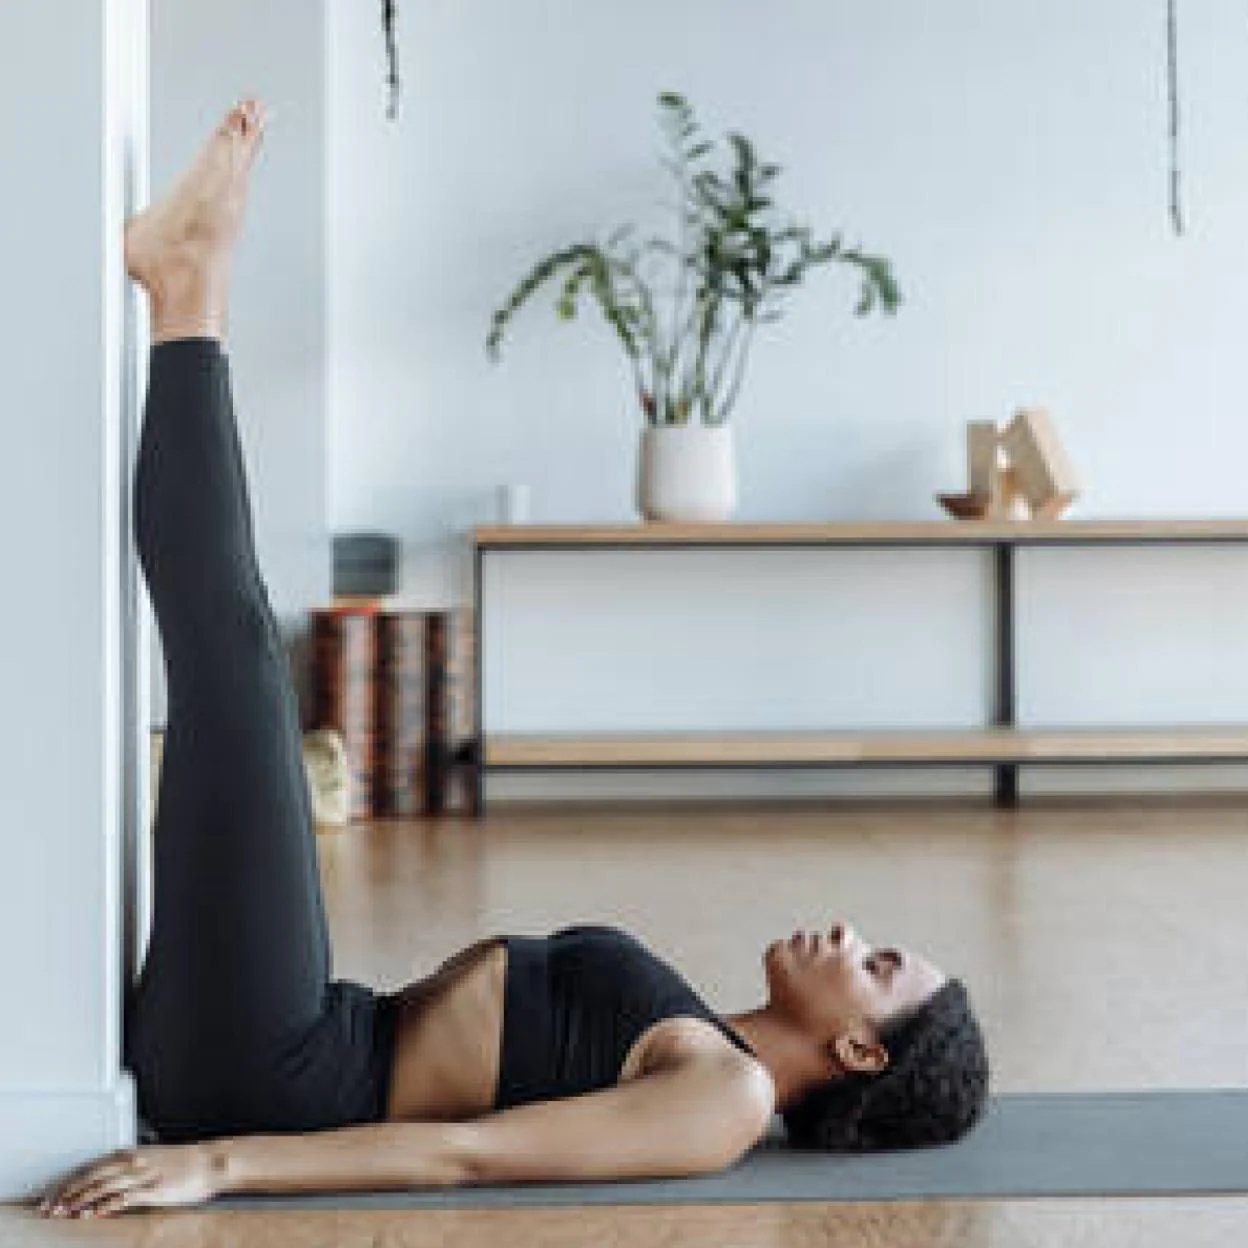 3 Everyday Yoga Poses | eat purely. live purely.